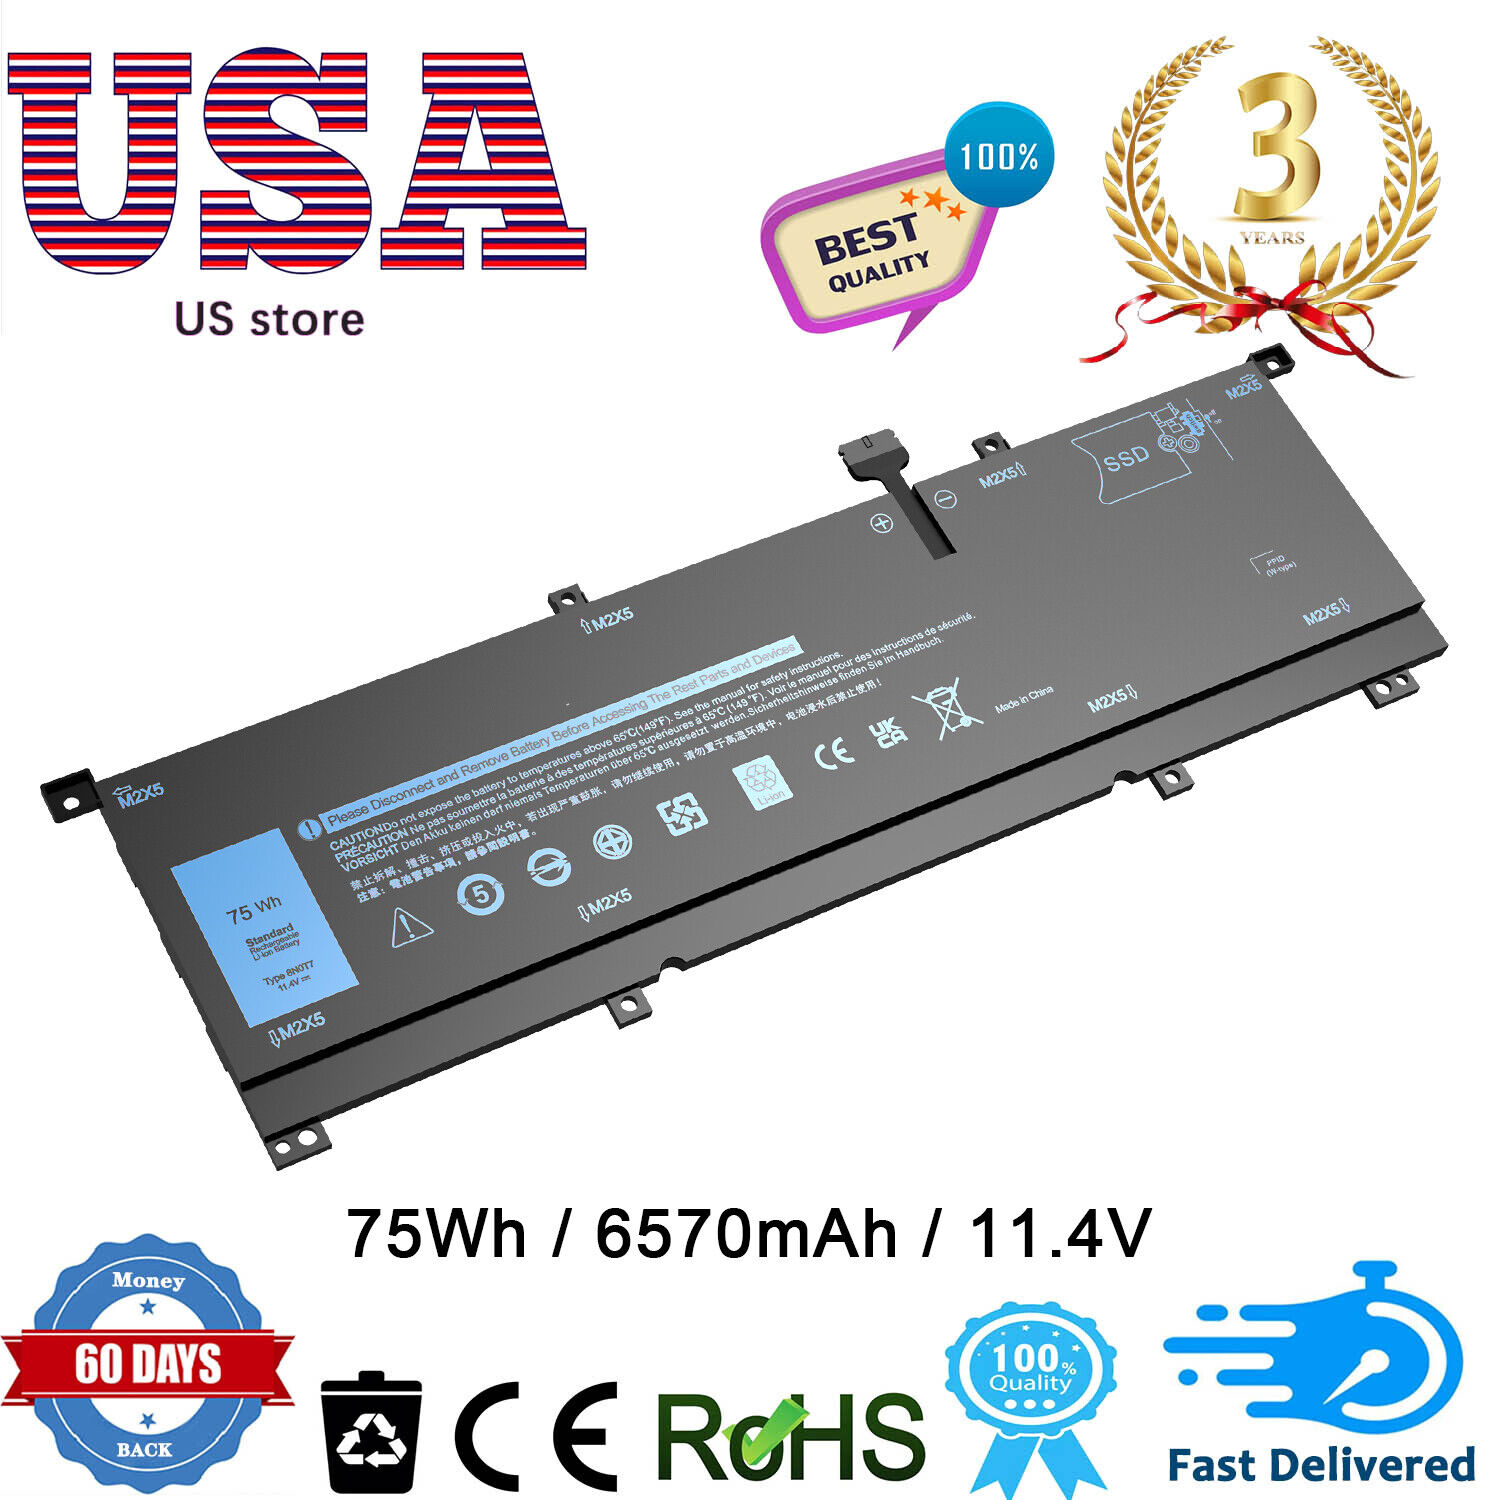 8N0T7 Replacement Battery For Dell XPS 15 9575 Series 11.4V 75Wh TMFYT V5MHM NEW